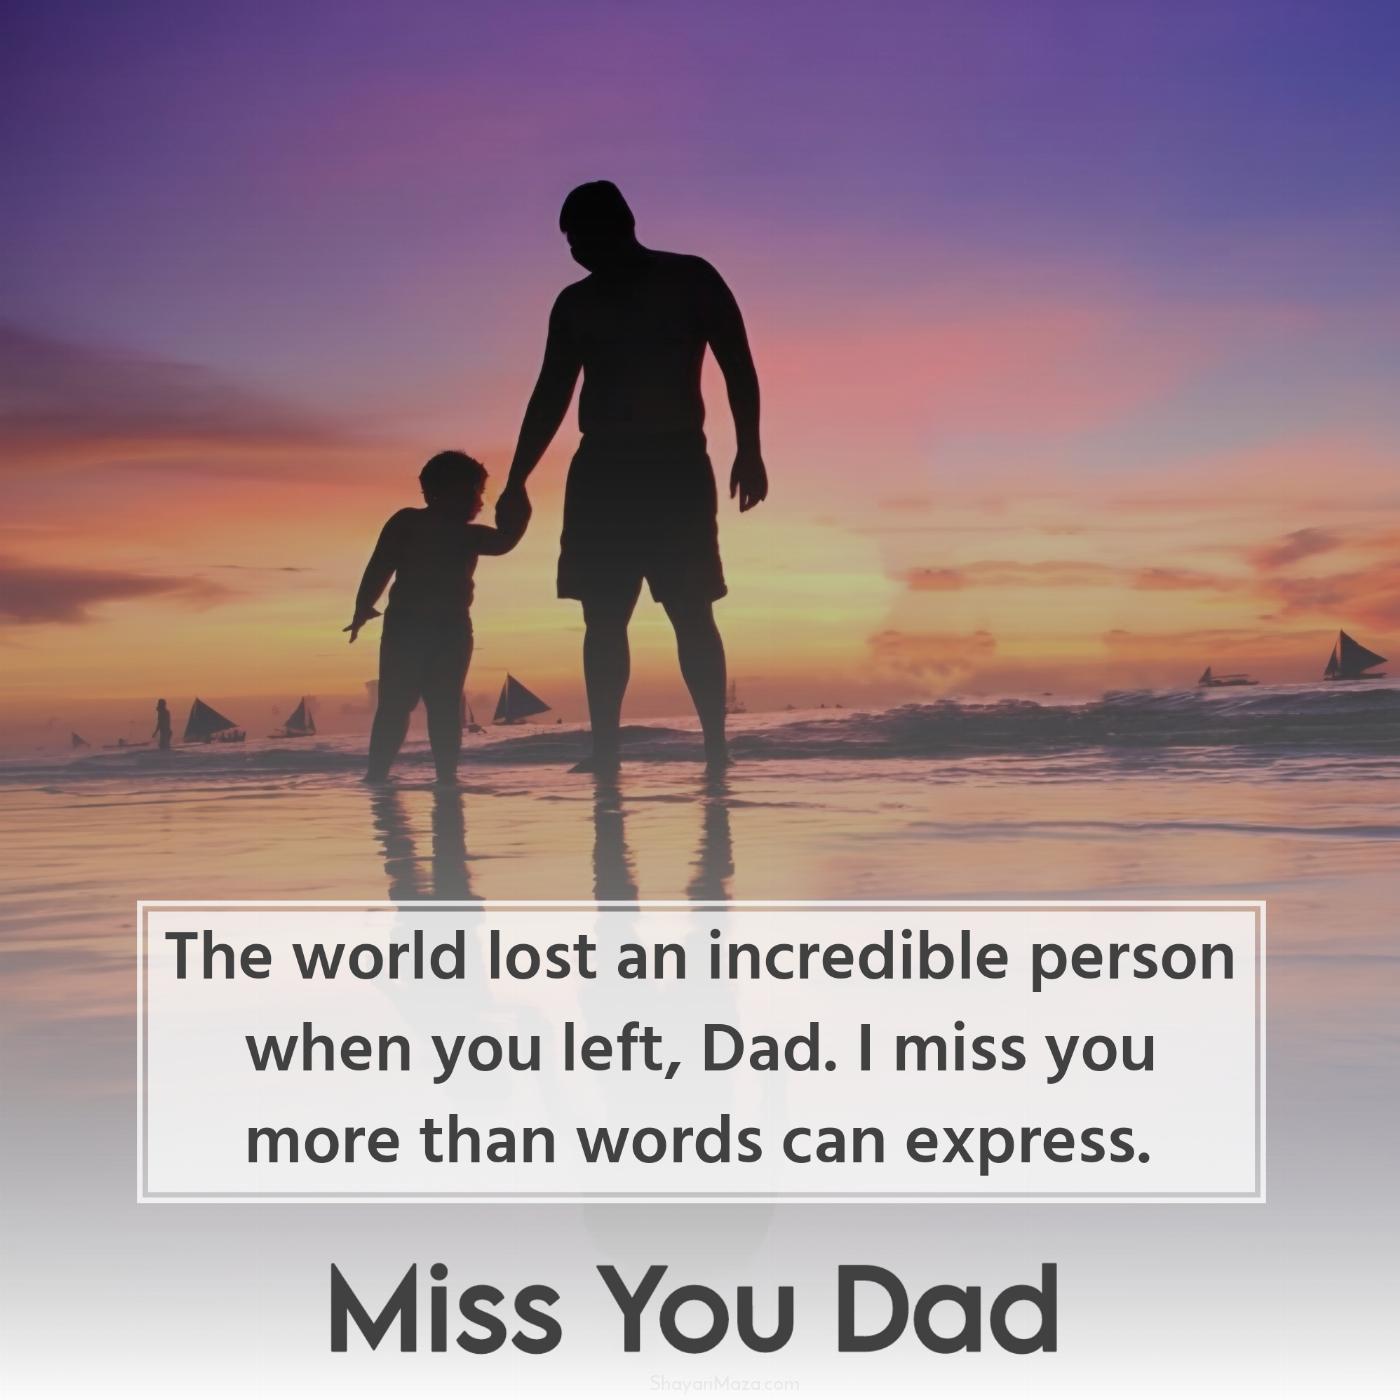 The world lost an incredible person when you left Dad